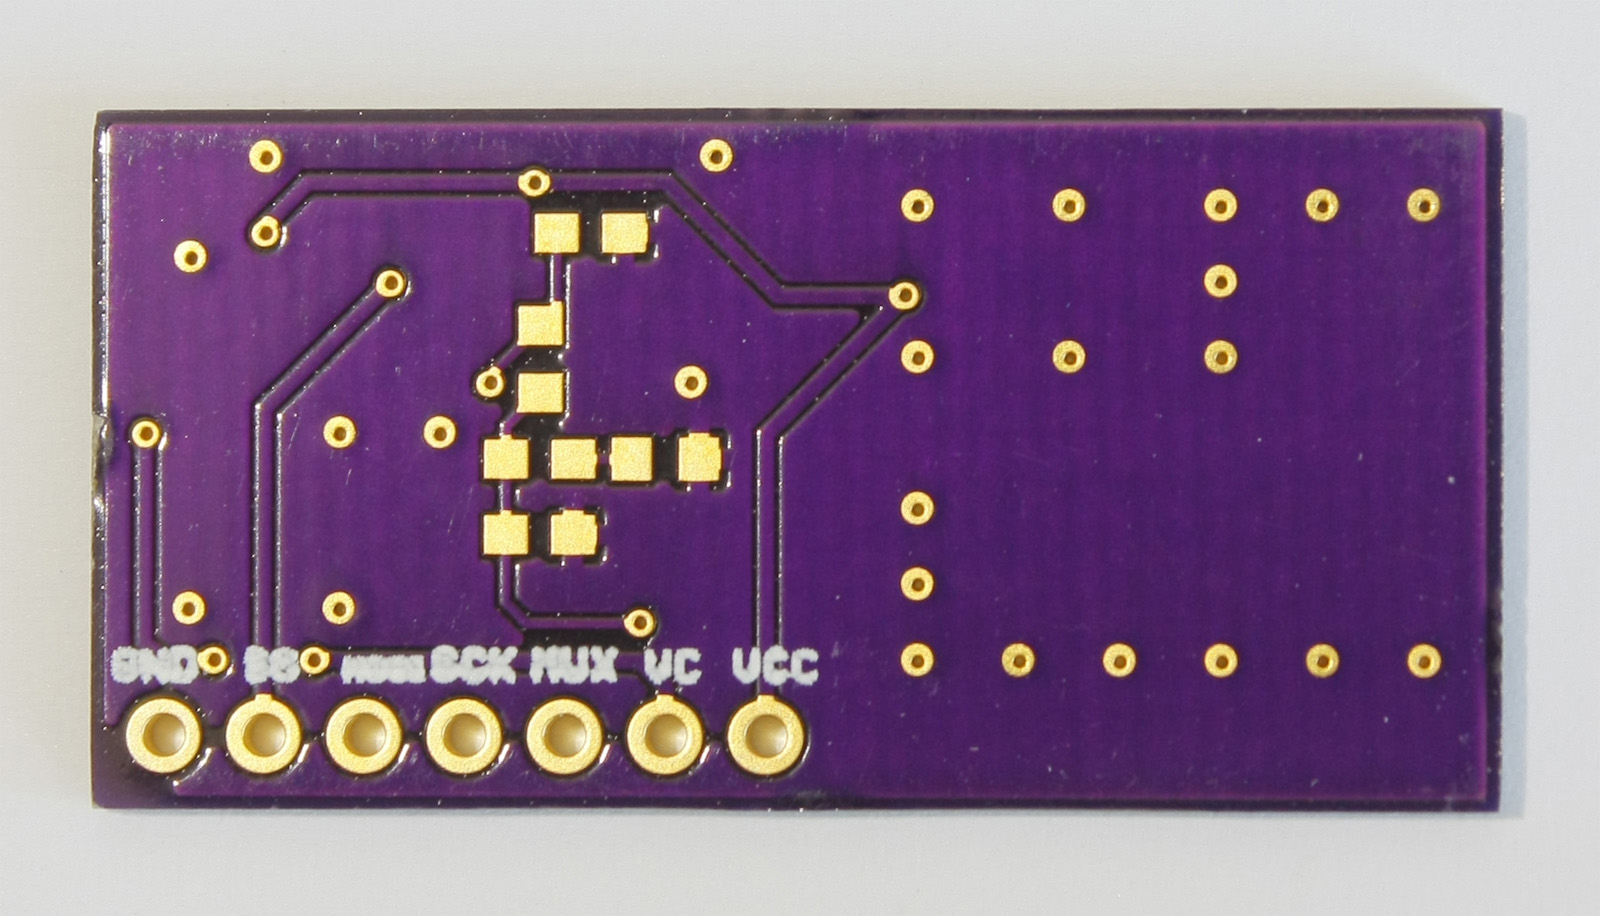 Bottom of unpopulated PCB